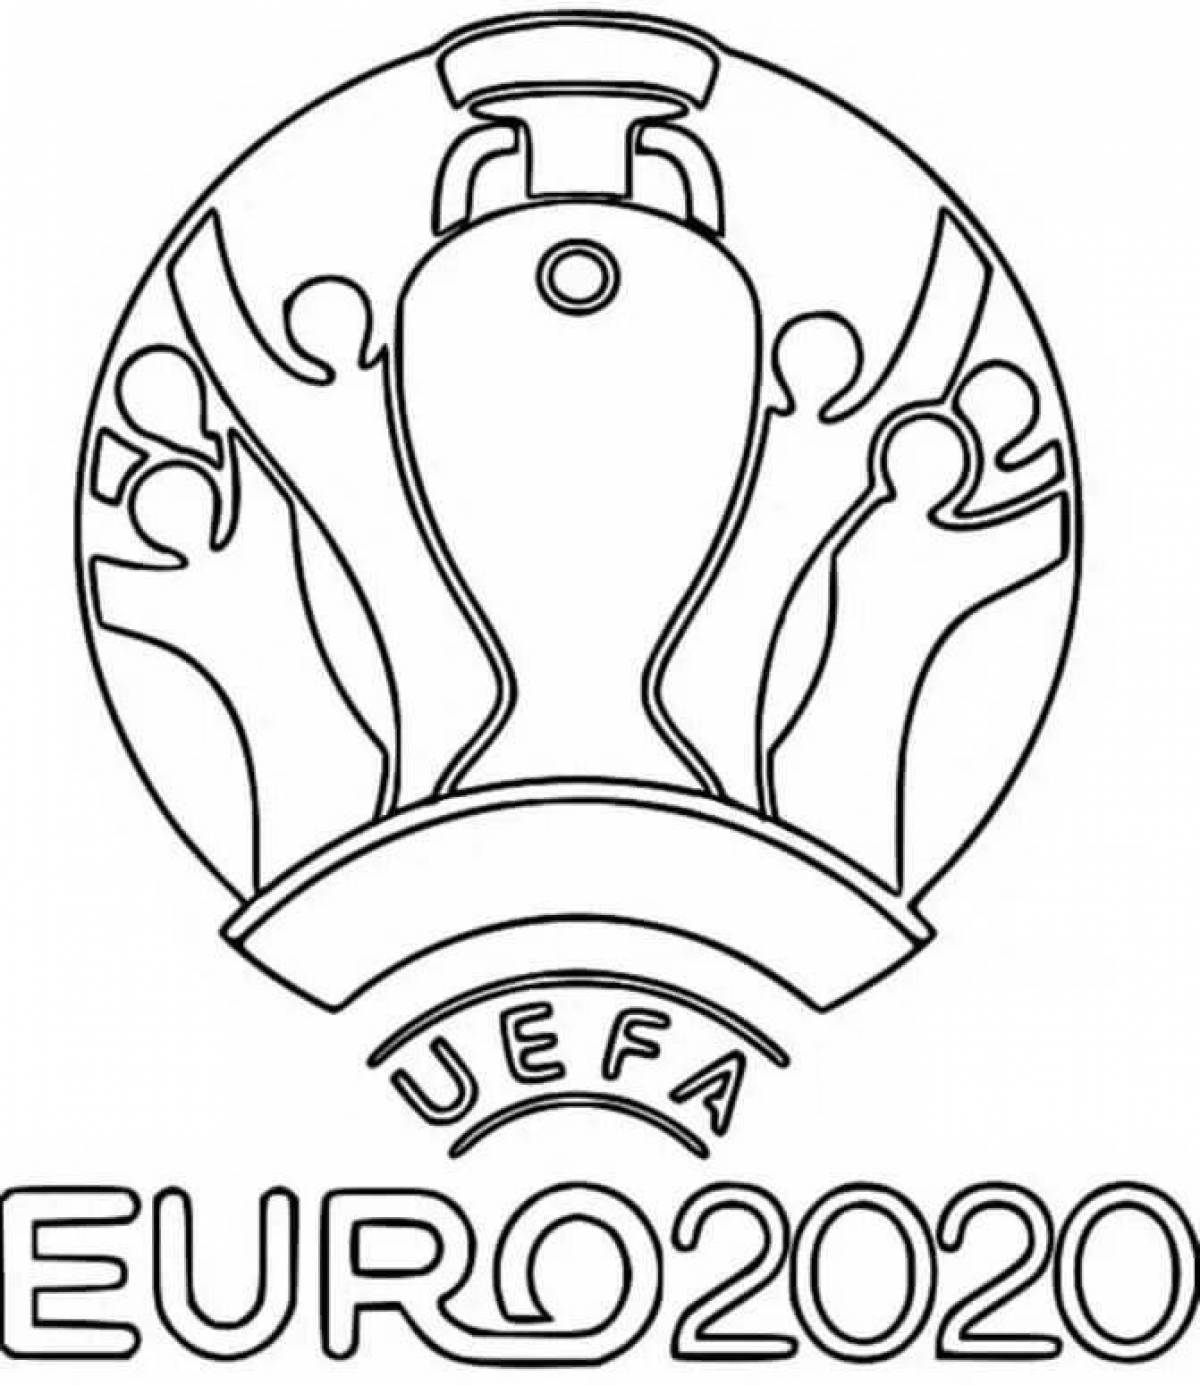 Coloring page live football world cup